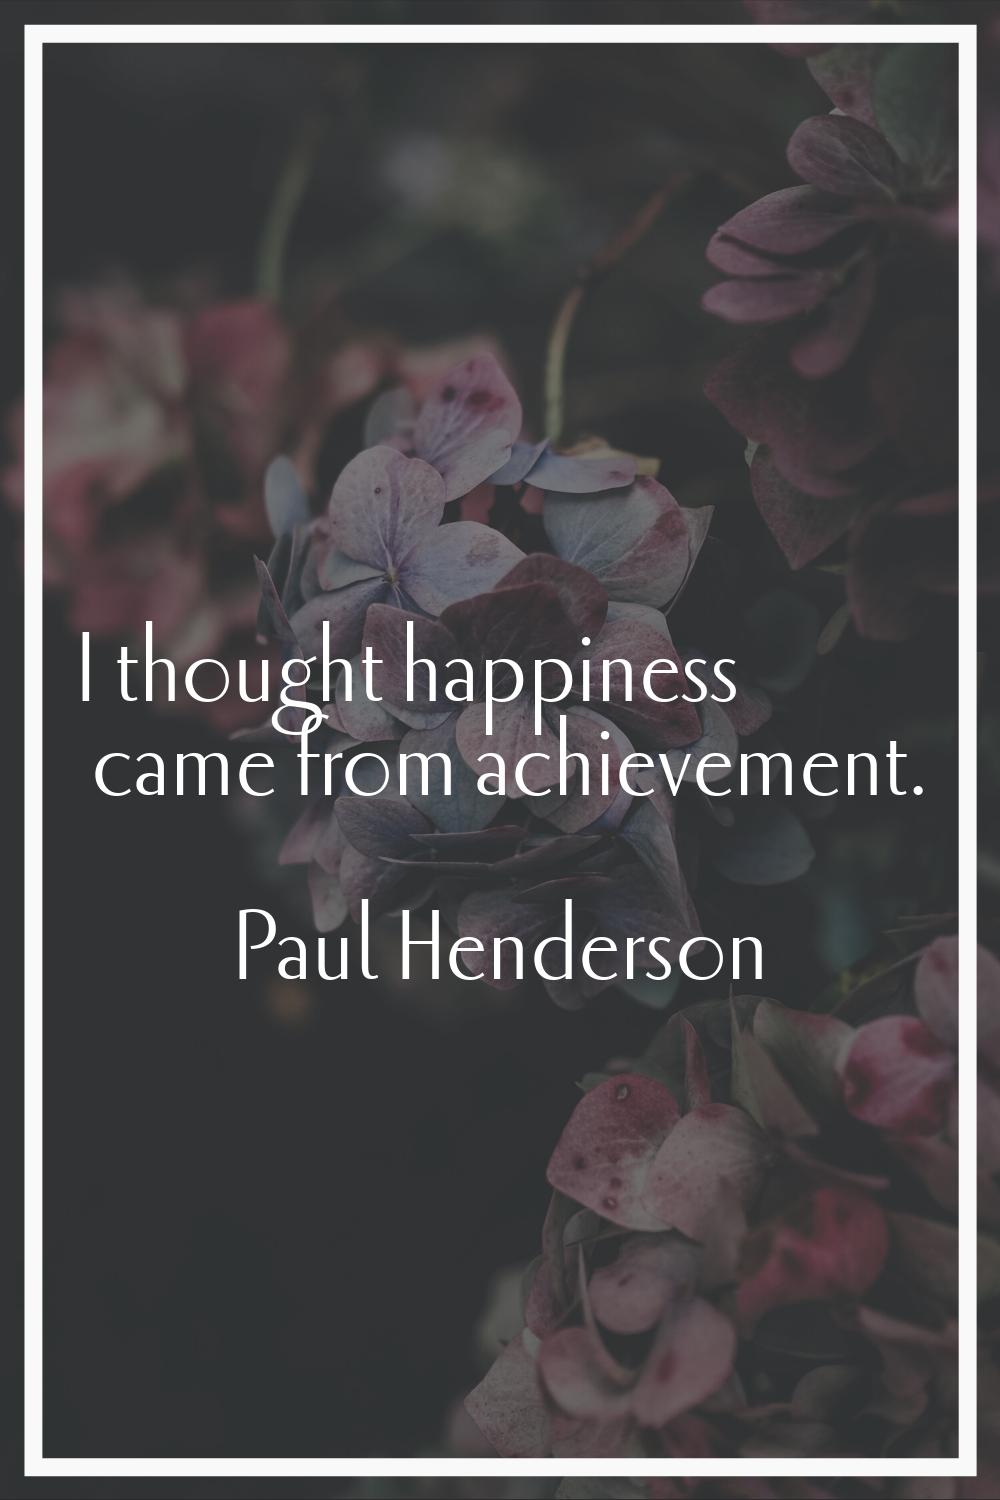 I thought happiness came from achievement.